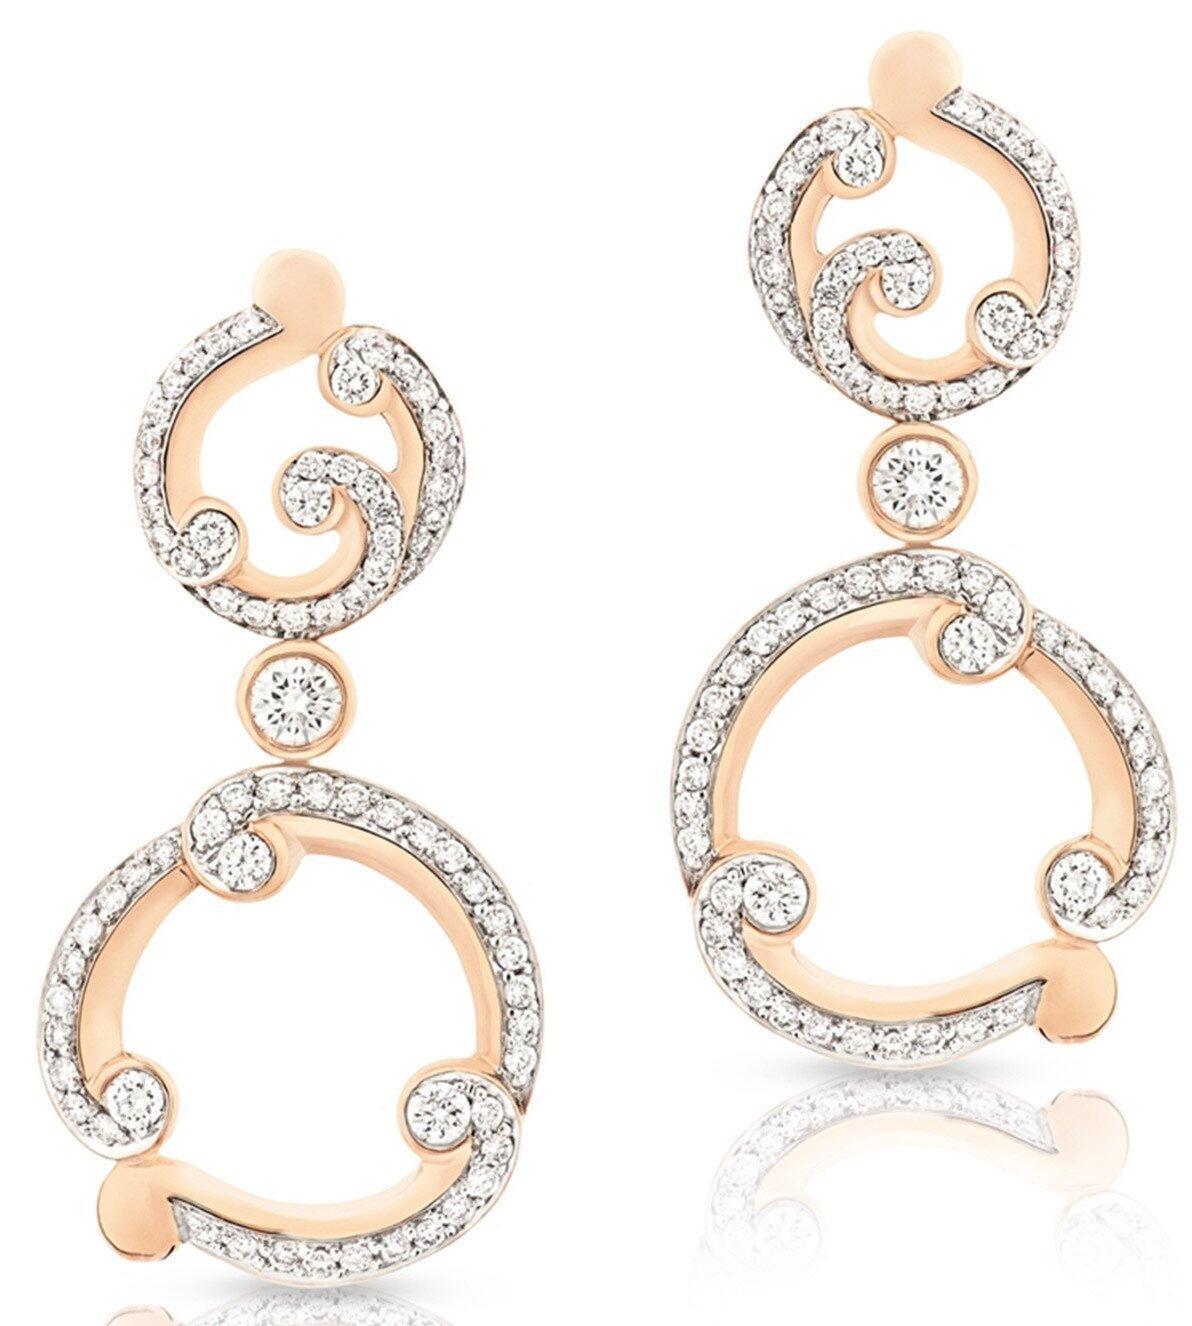 Faberge Rococo 18ct Rose Gold Pave Diamond Drop Earrings